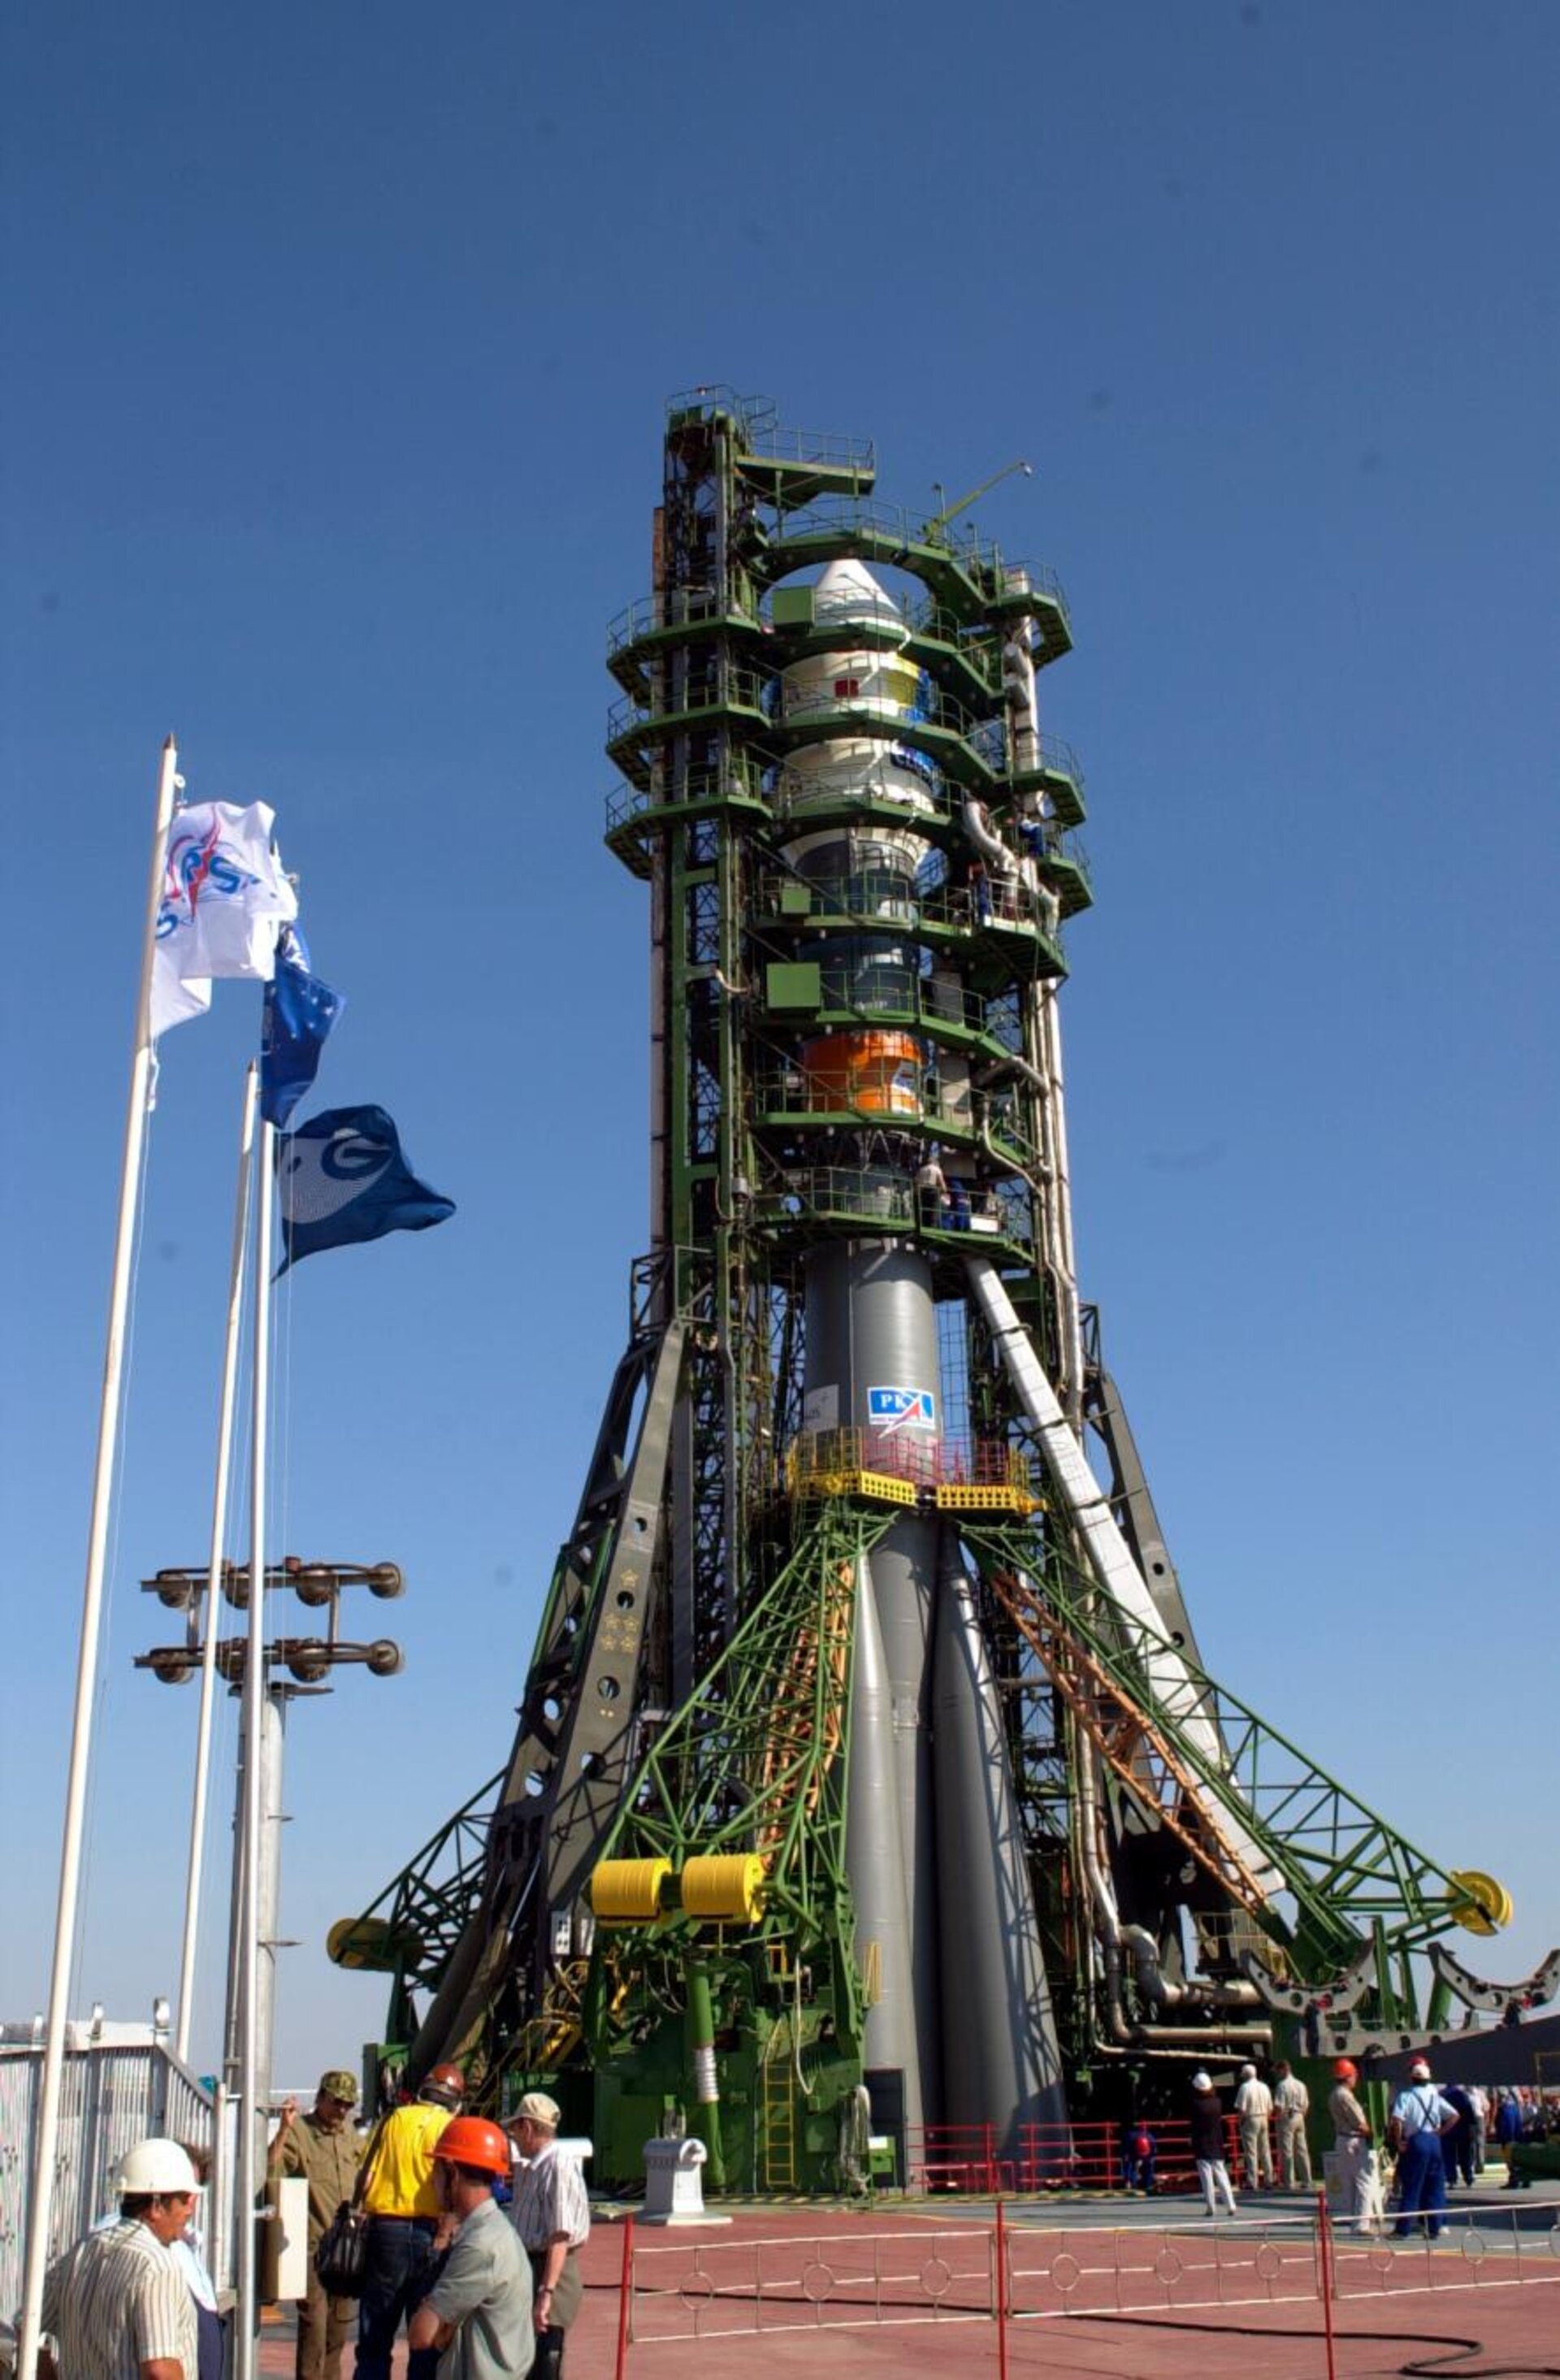 The Soyuz/ST rocket on the launchpad